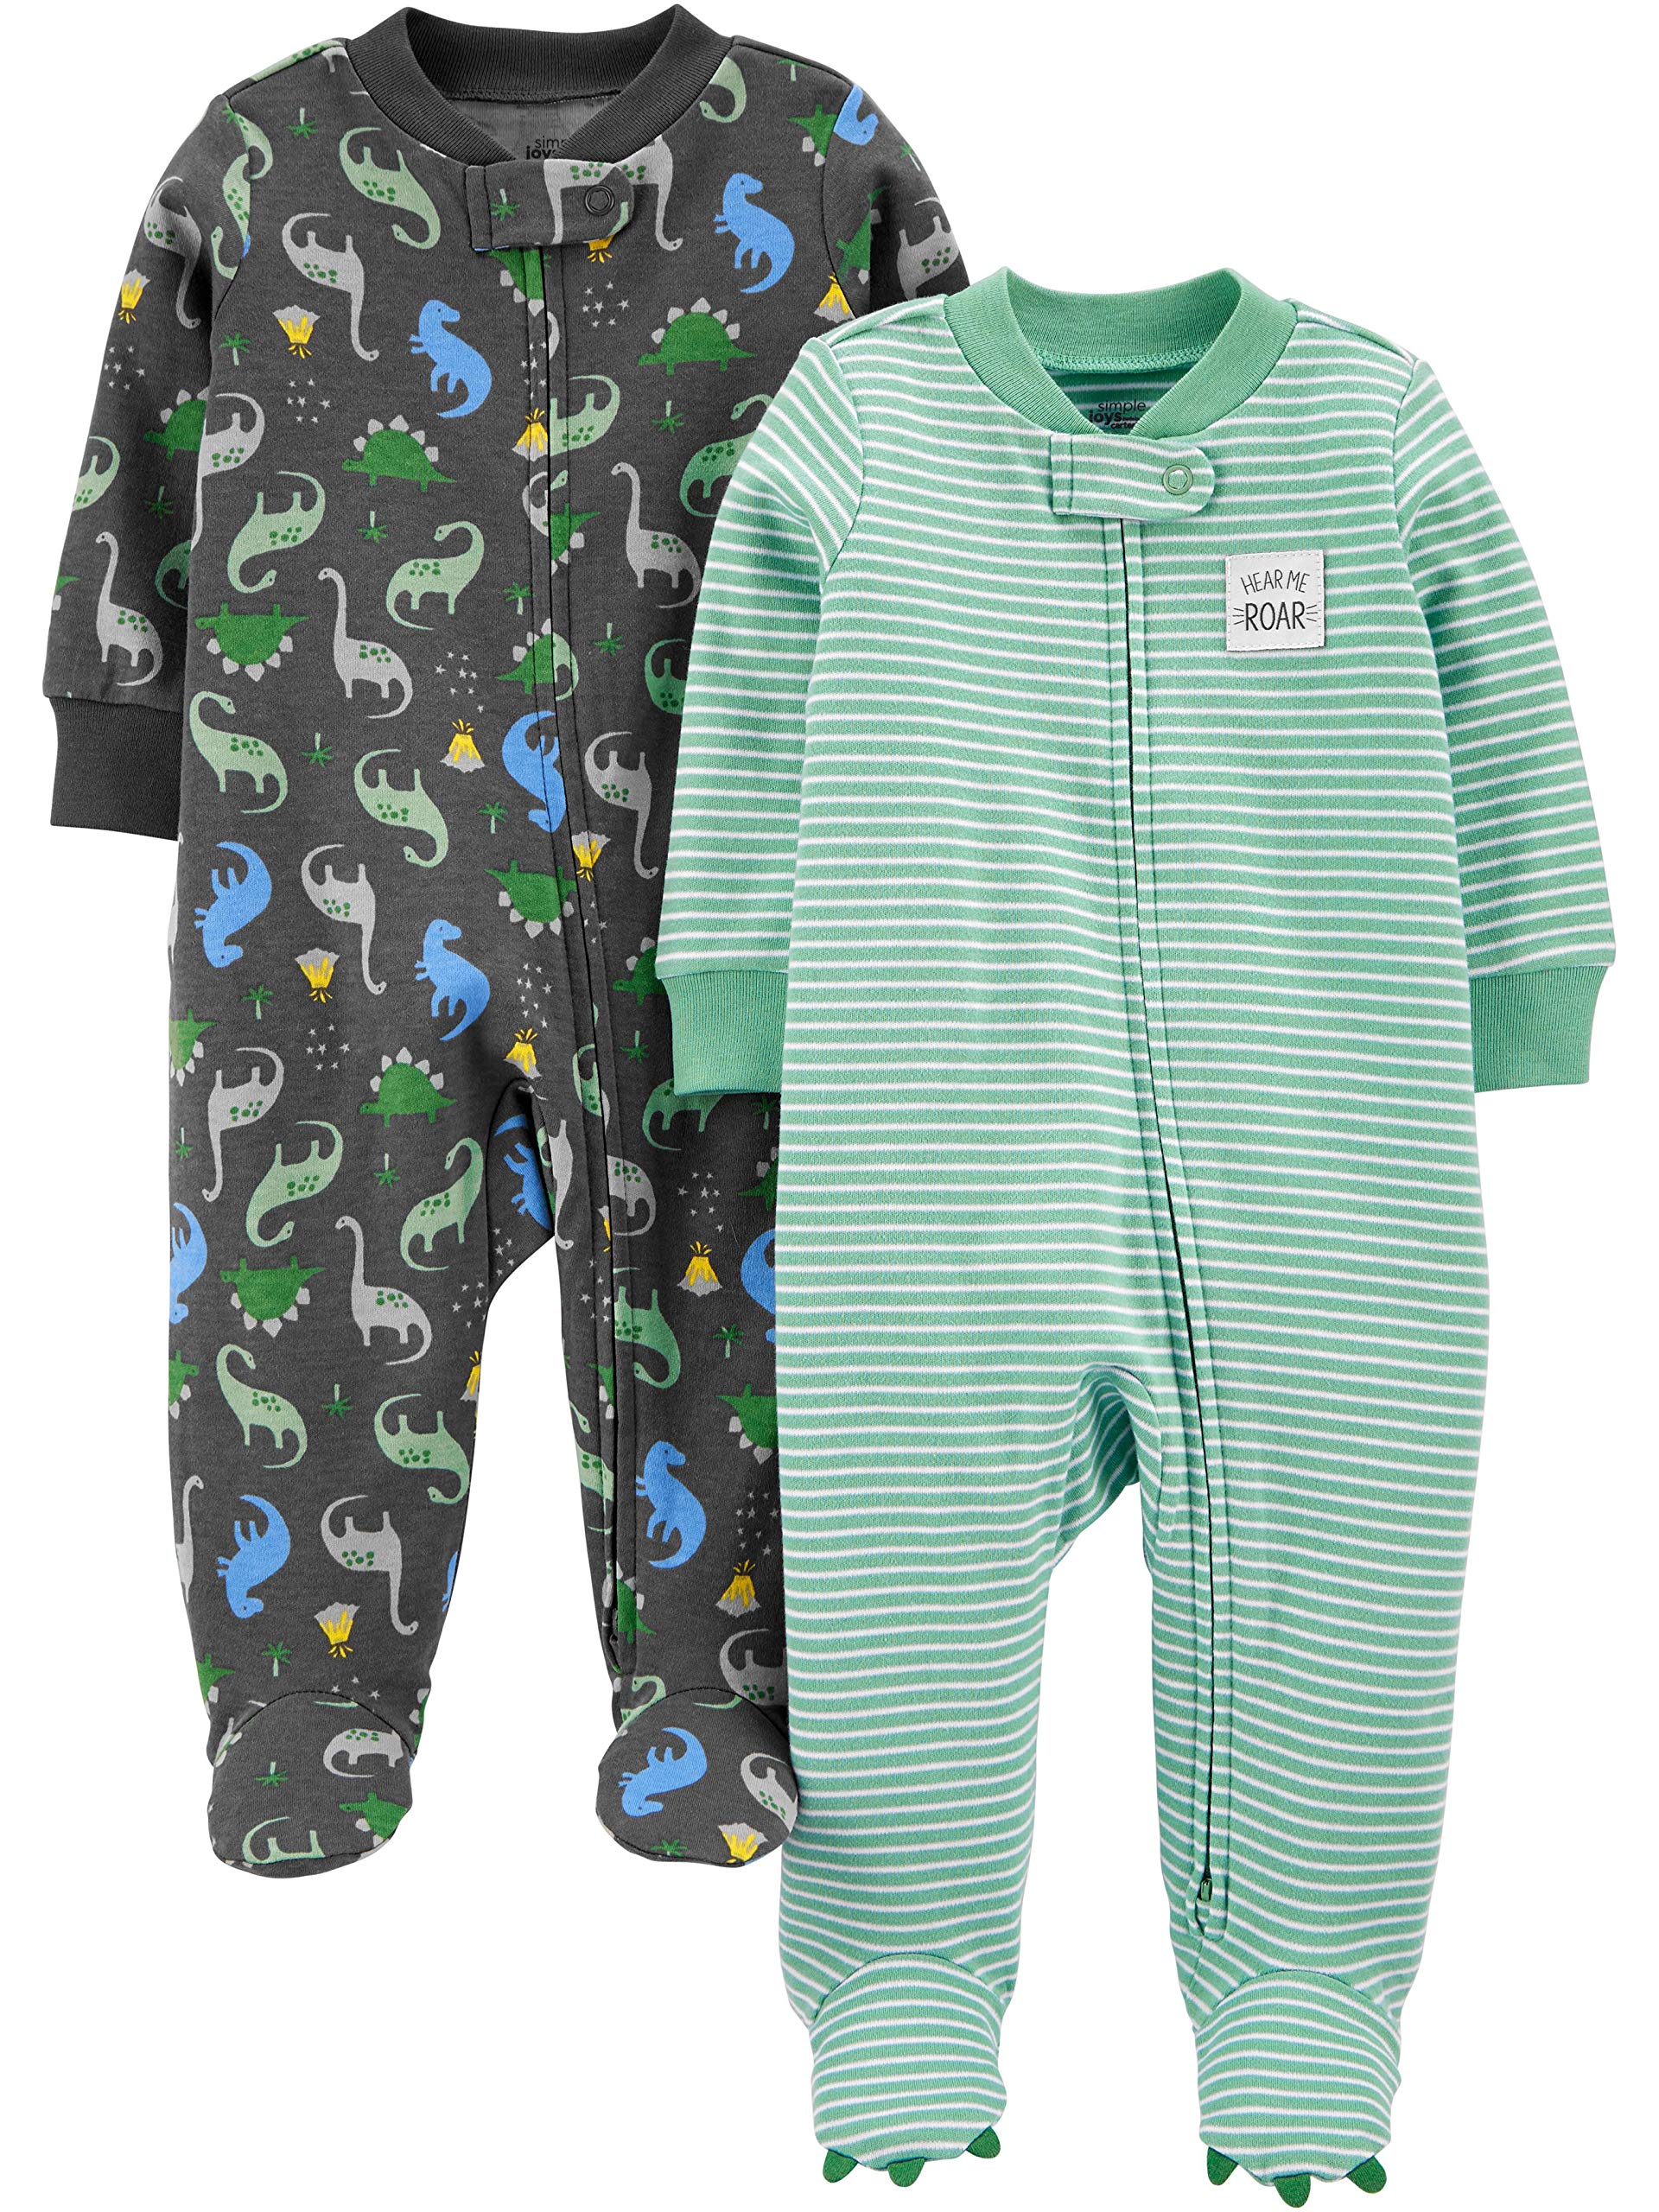 Simple Joys by Carter's Baby Boys' 2-Way Zip Cotton Footed Sleep and Play, Pack of 2